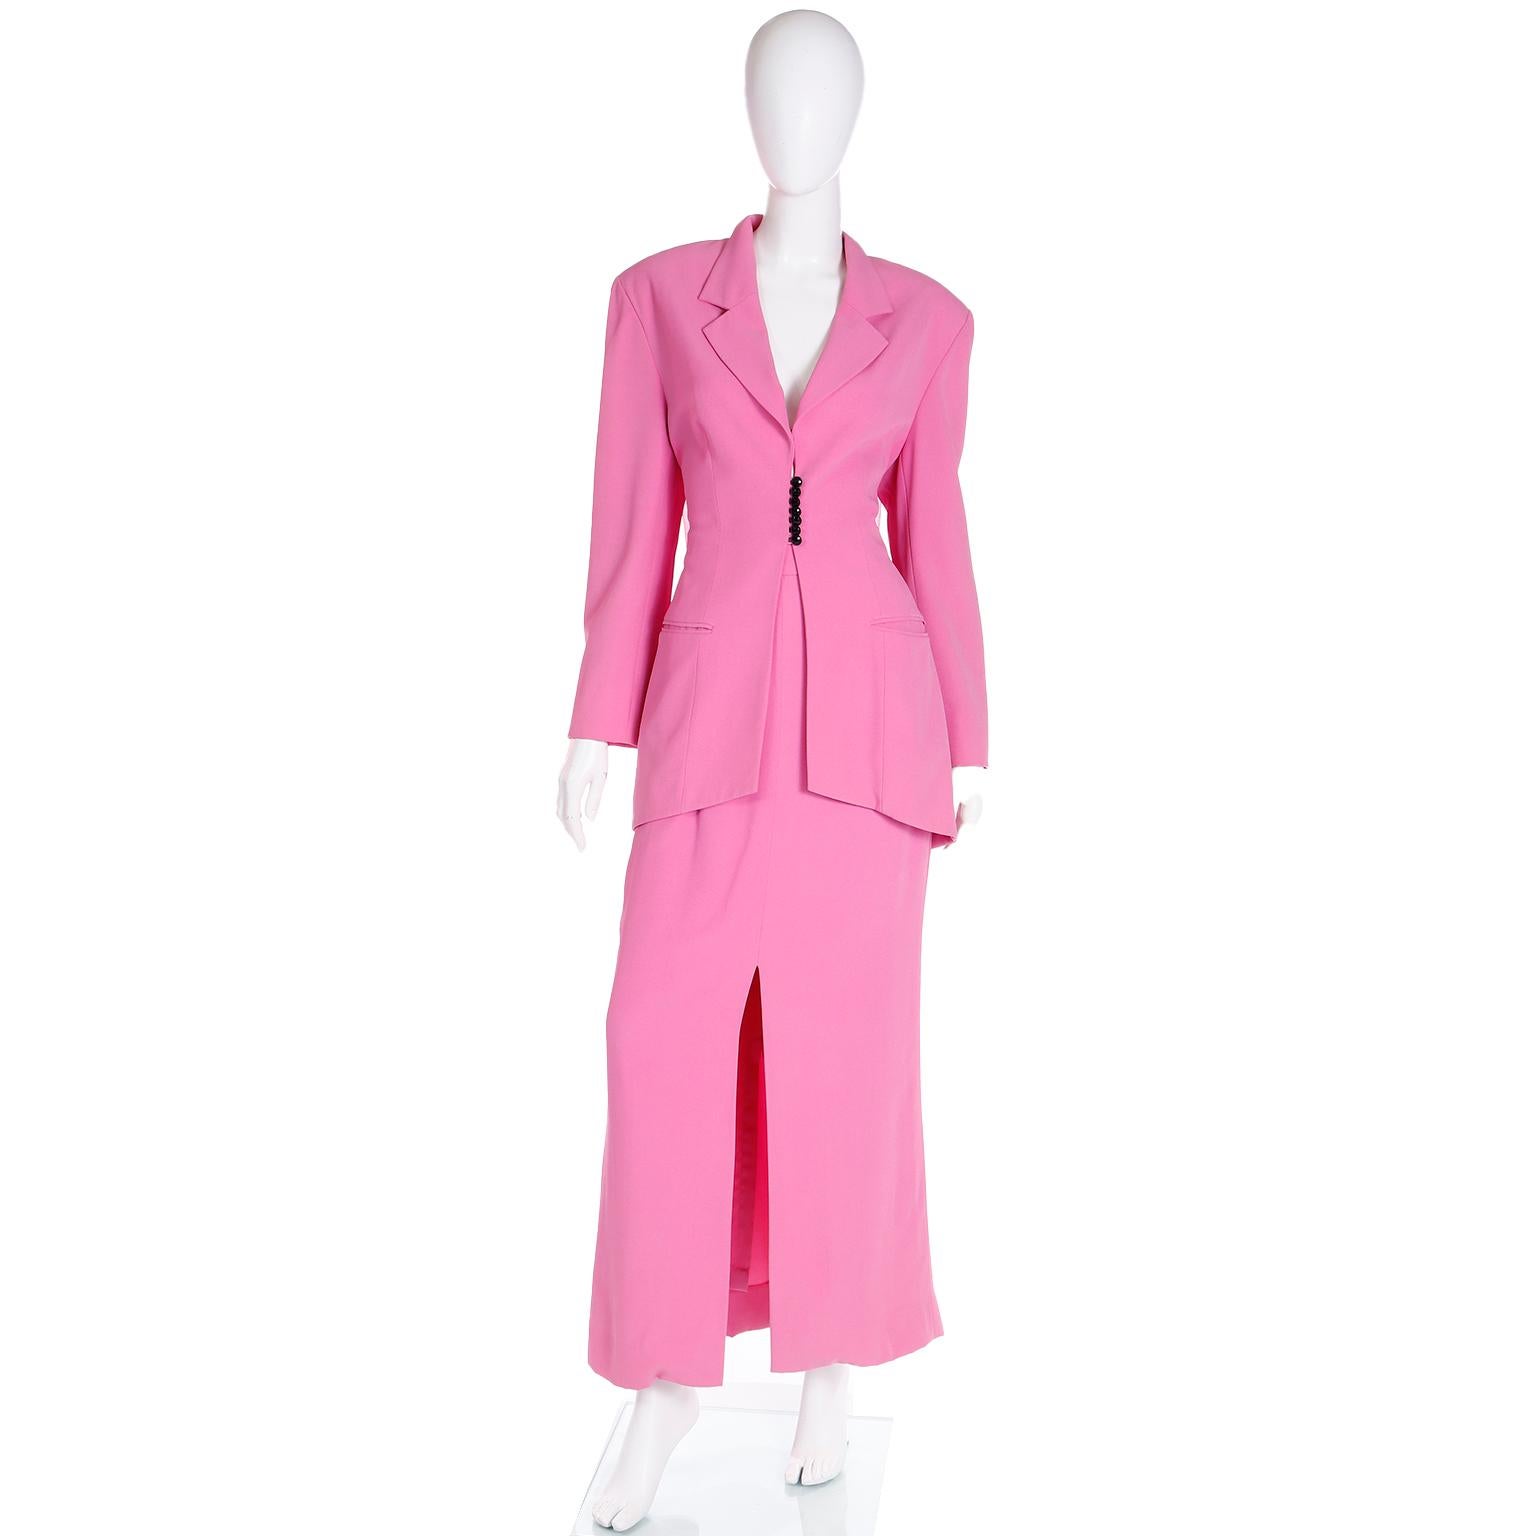 1990s Christian Dior Gianfranco Ferre Pink Jacket w Chiffon Drape & 2 Skirts In Excellent Condition For Sale In Portland, OR